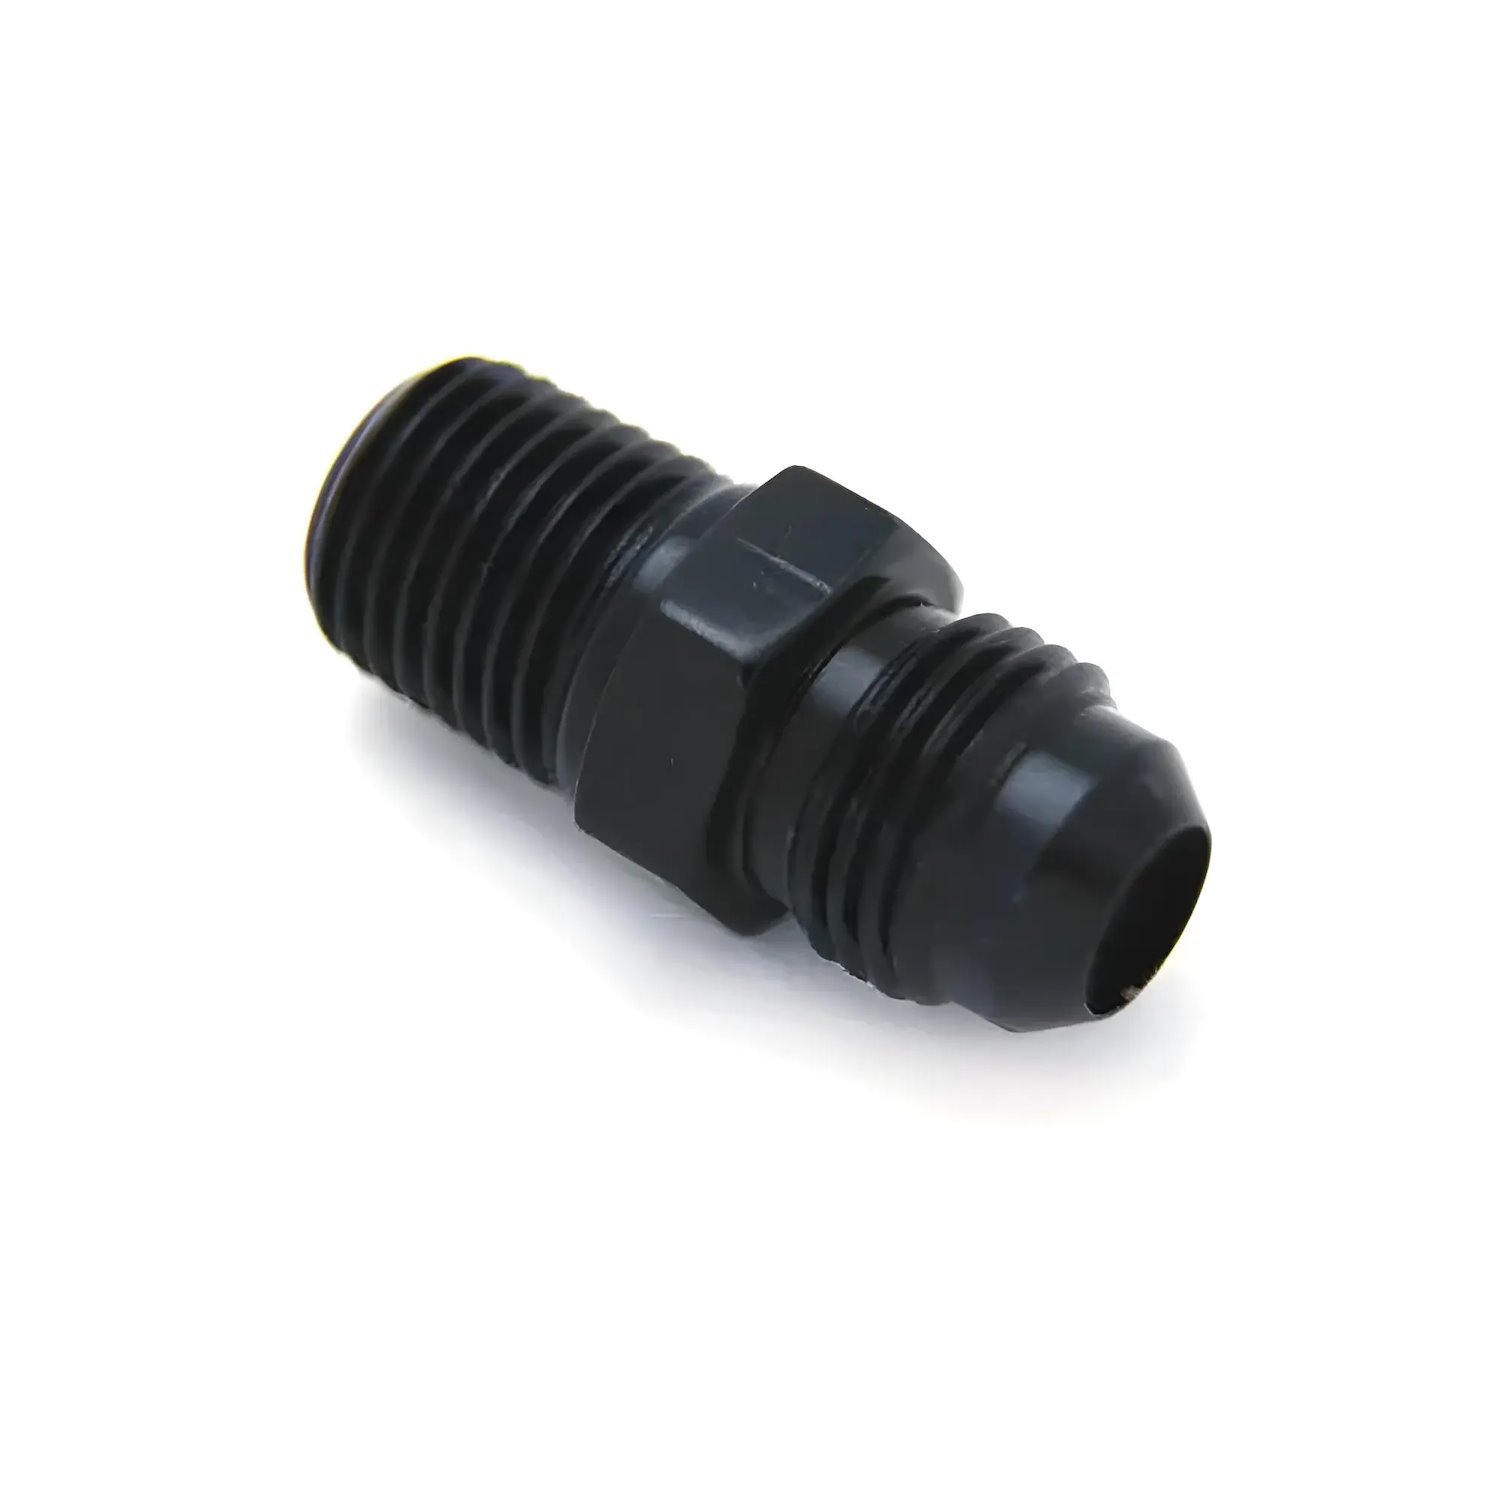 00-01156 1/4 in. NPT x 6AN Straight Fitting, Male/Male, Black